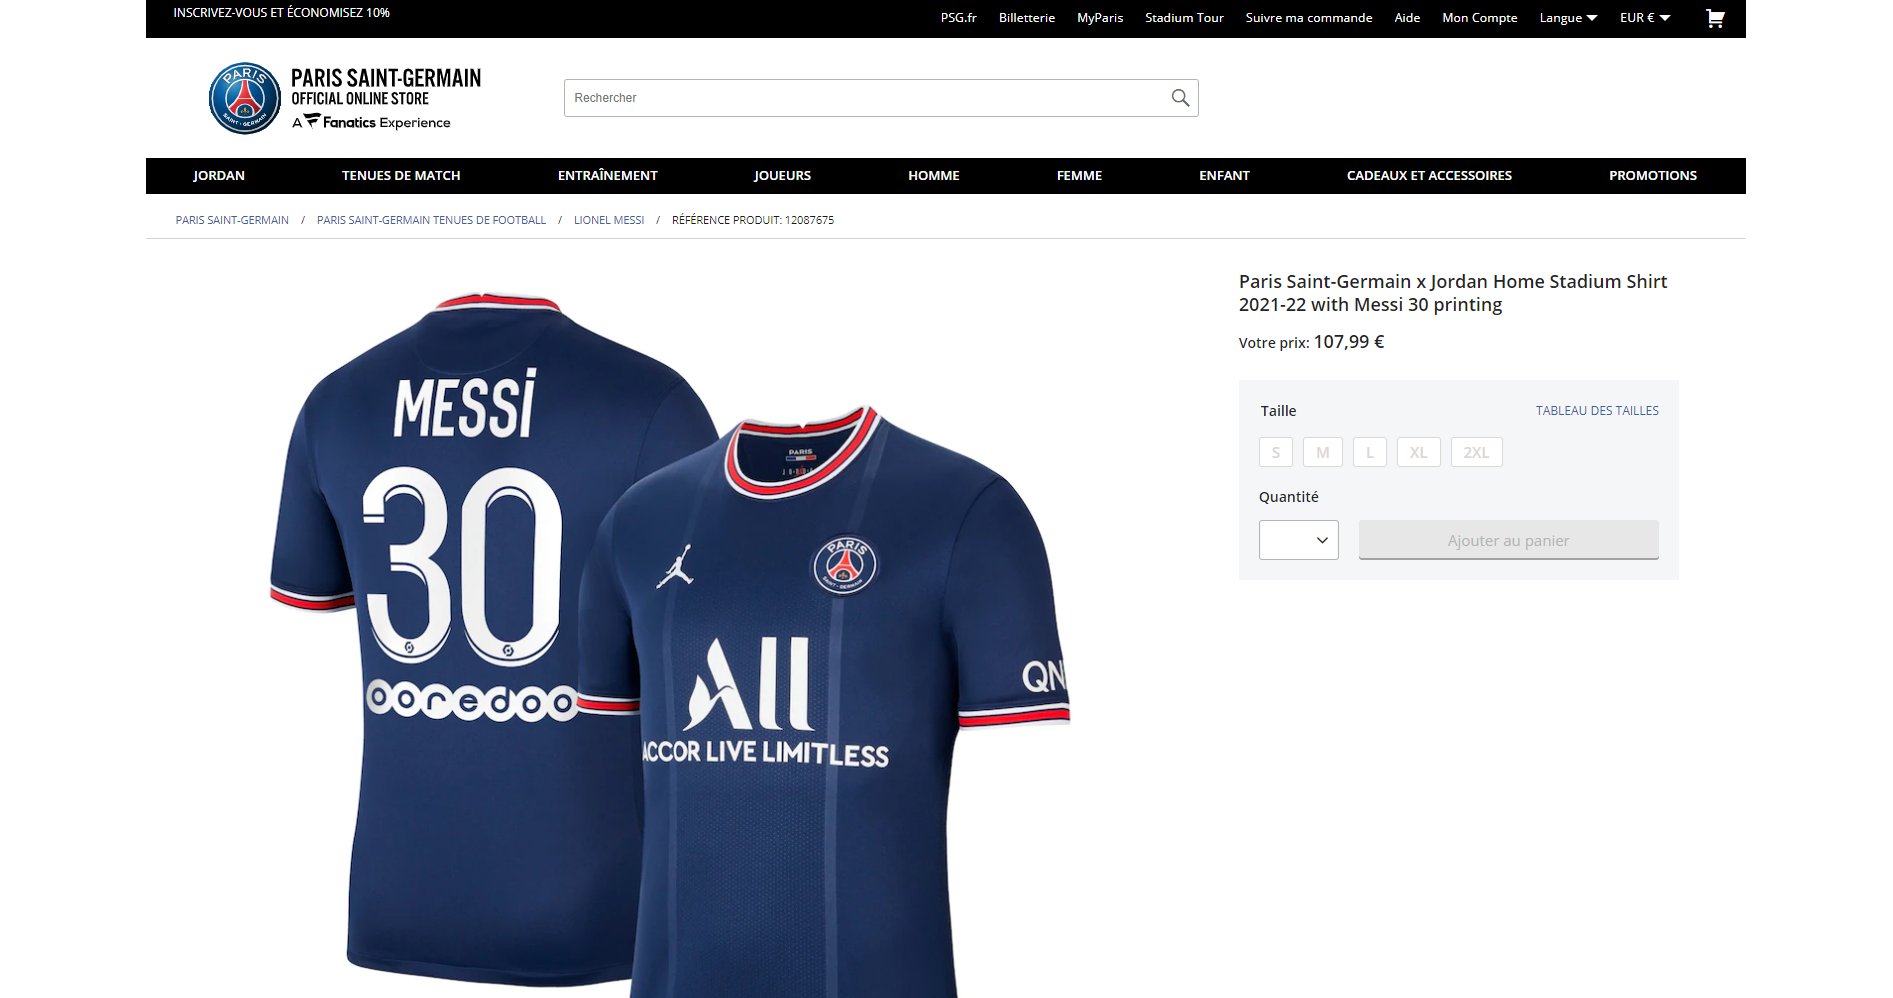 Lionel Messi’s shirt sold out on Paris Saint-Germain’s official online store in 30 minutes